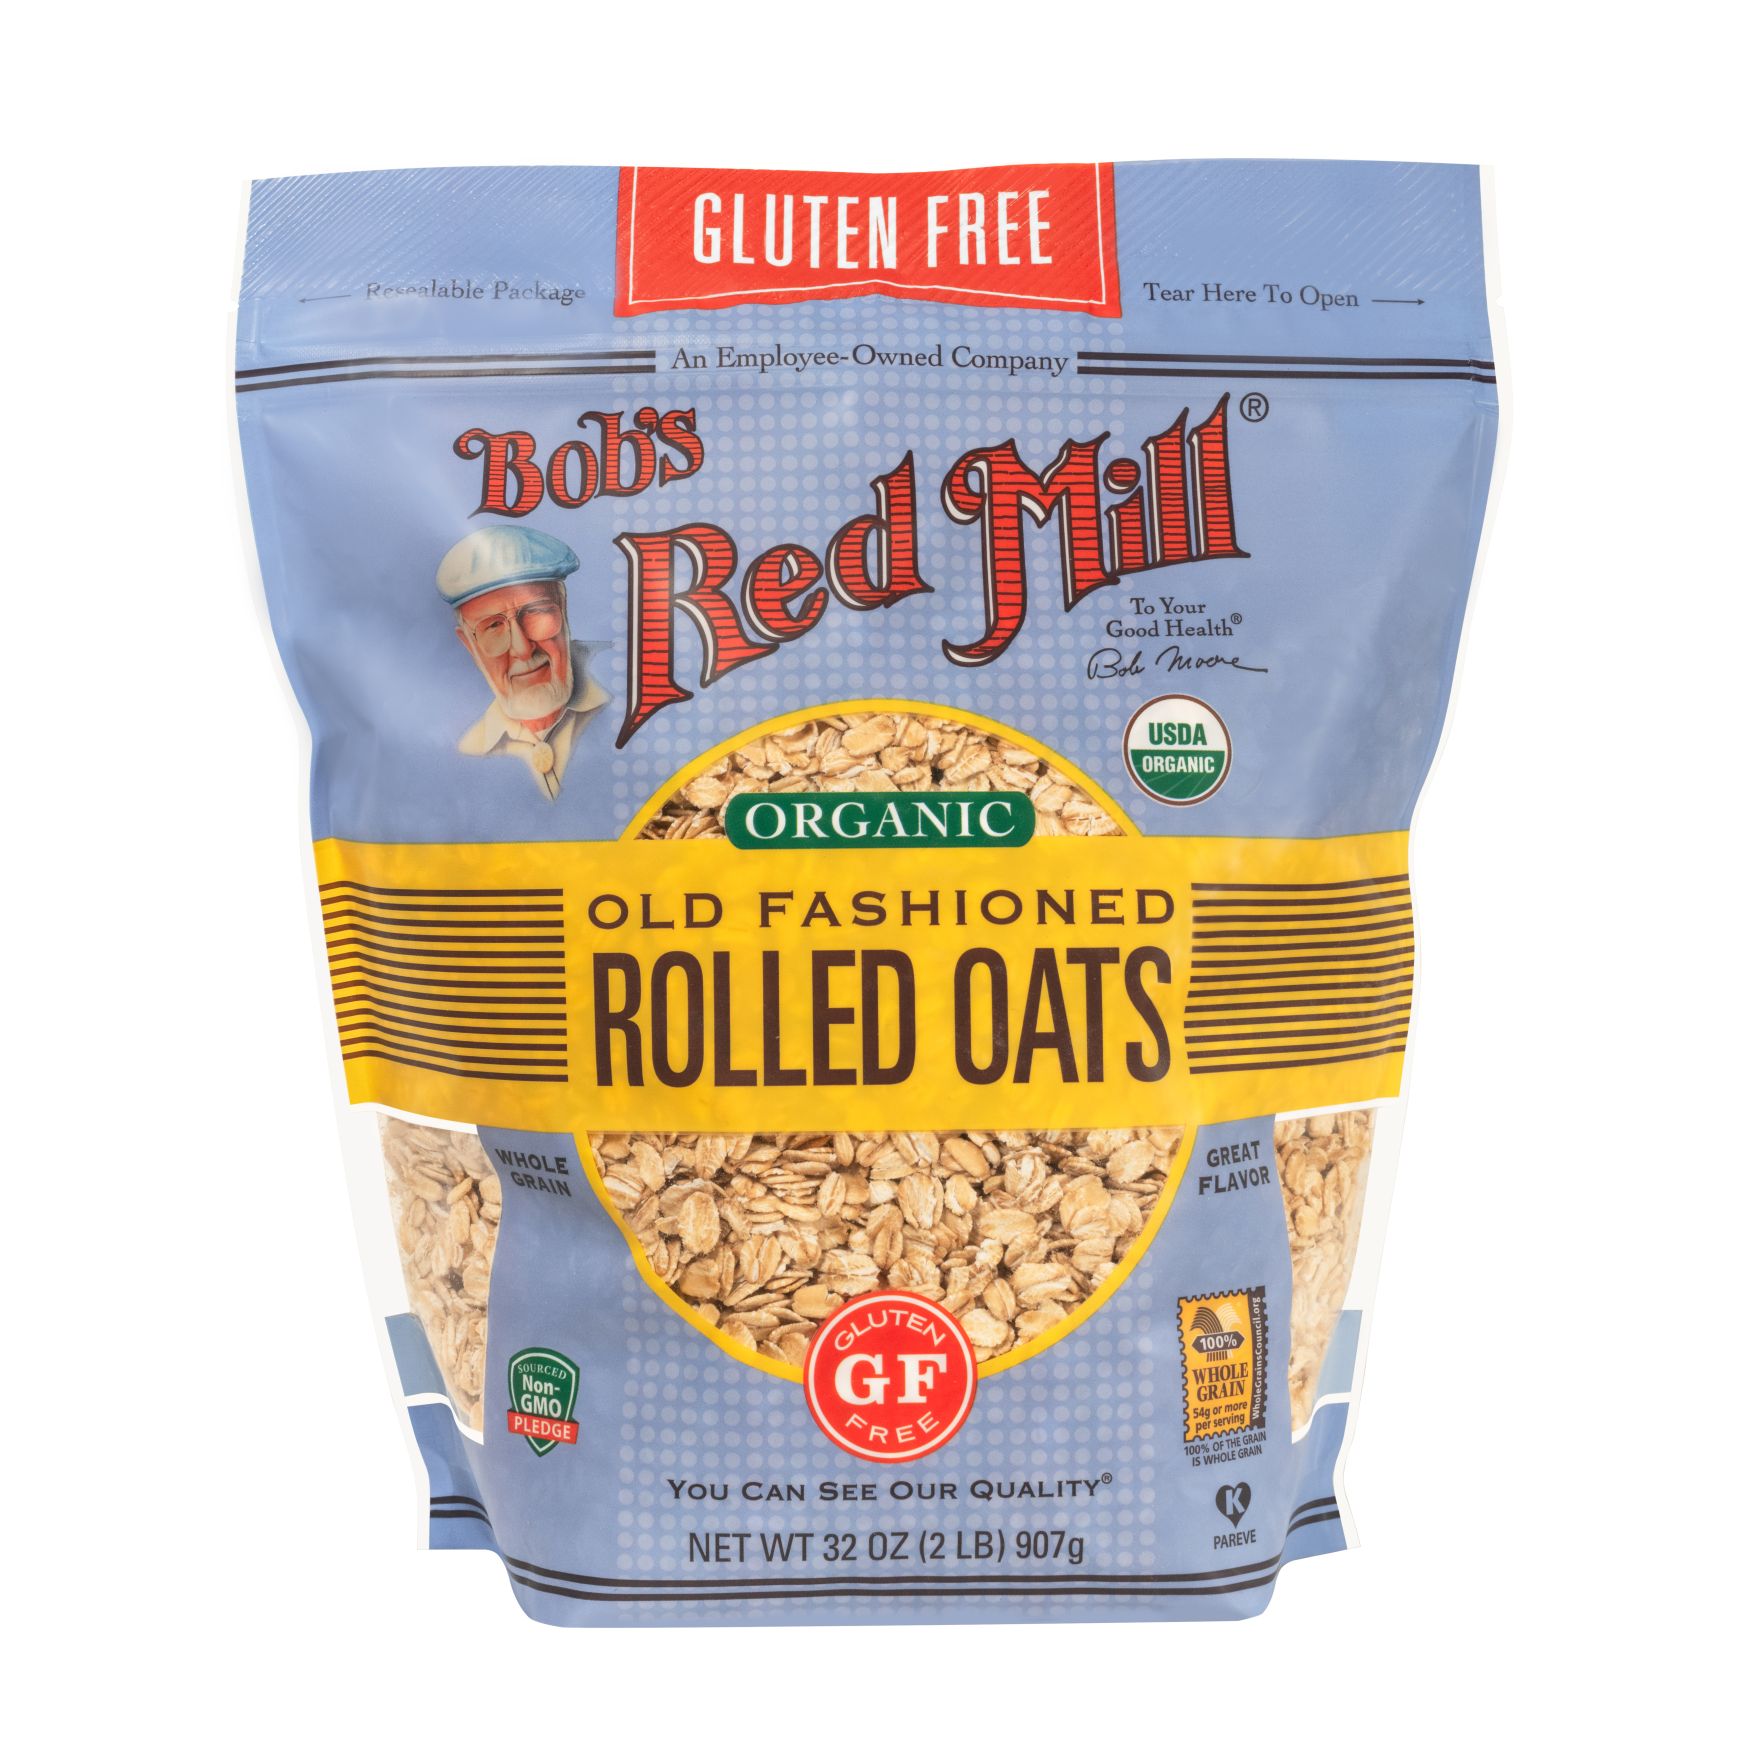 Gluten Free Organic Old Fashioned Rolled Oats :: Bob's Red Mill